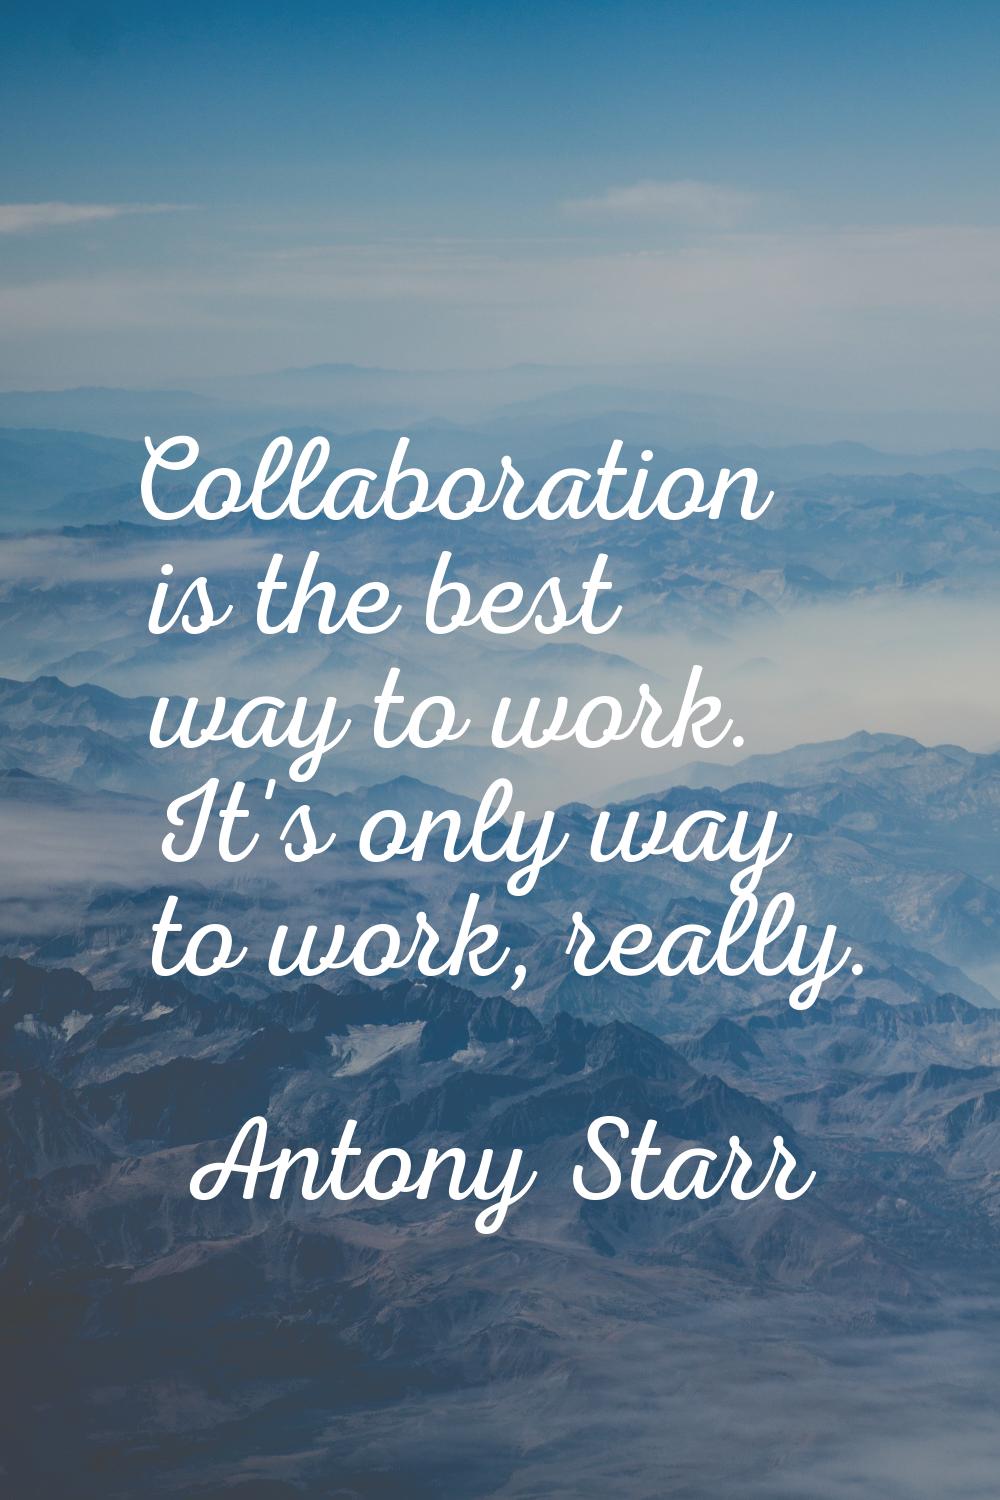 Collaboration is the best way to work. It's only way to work, really.